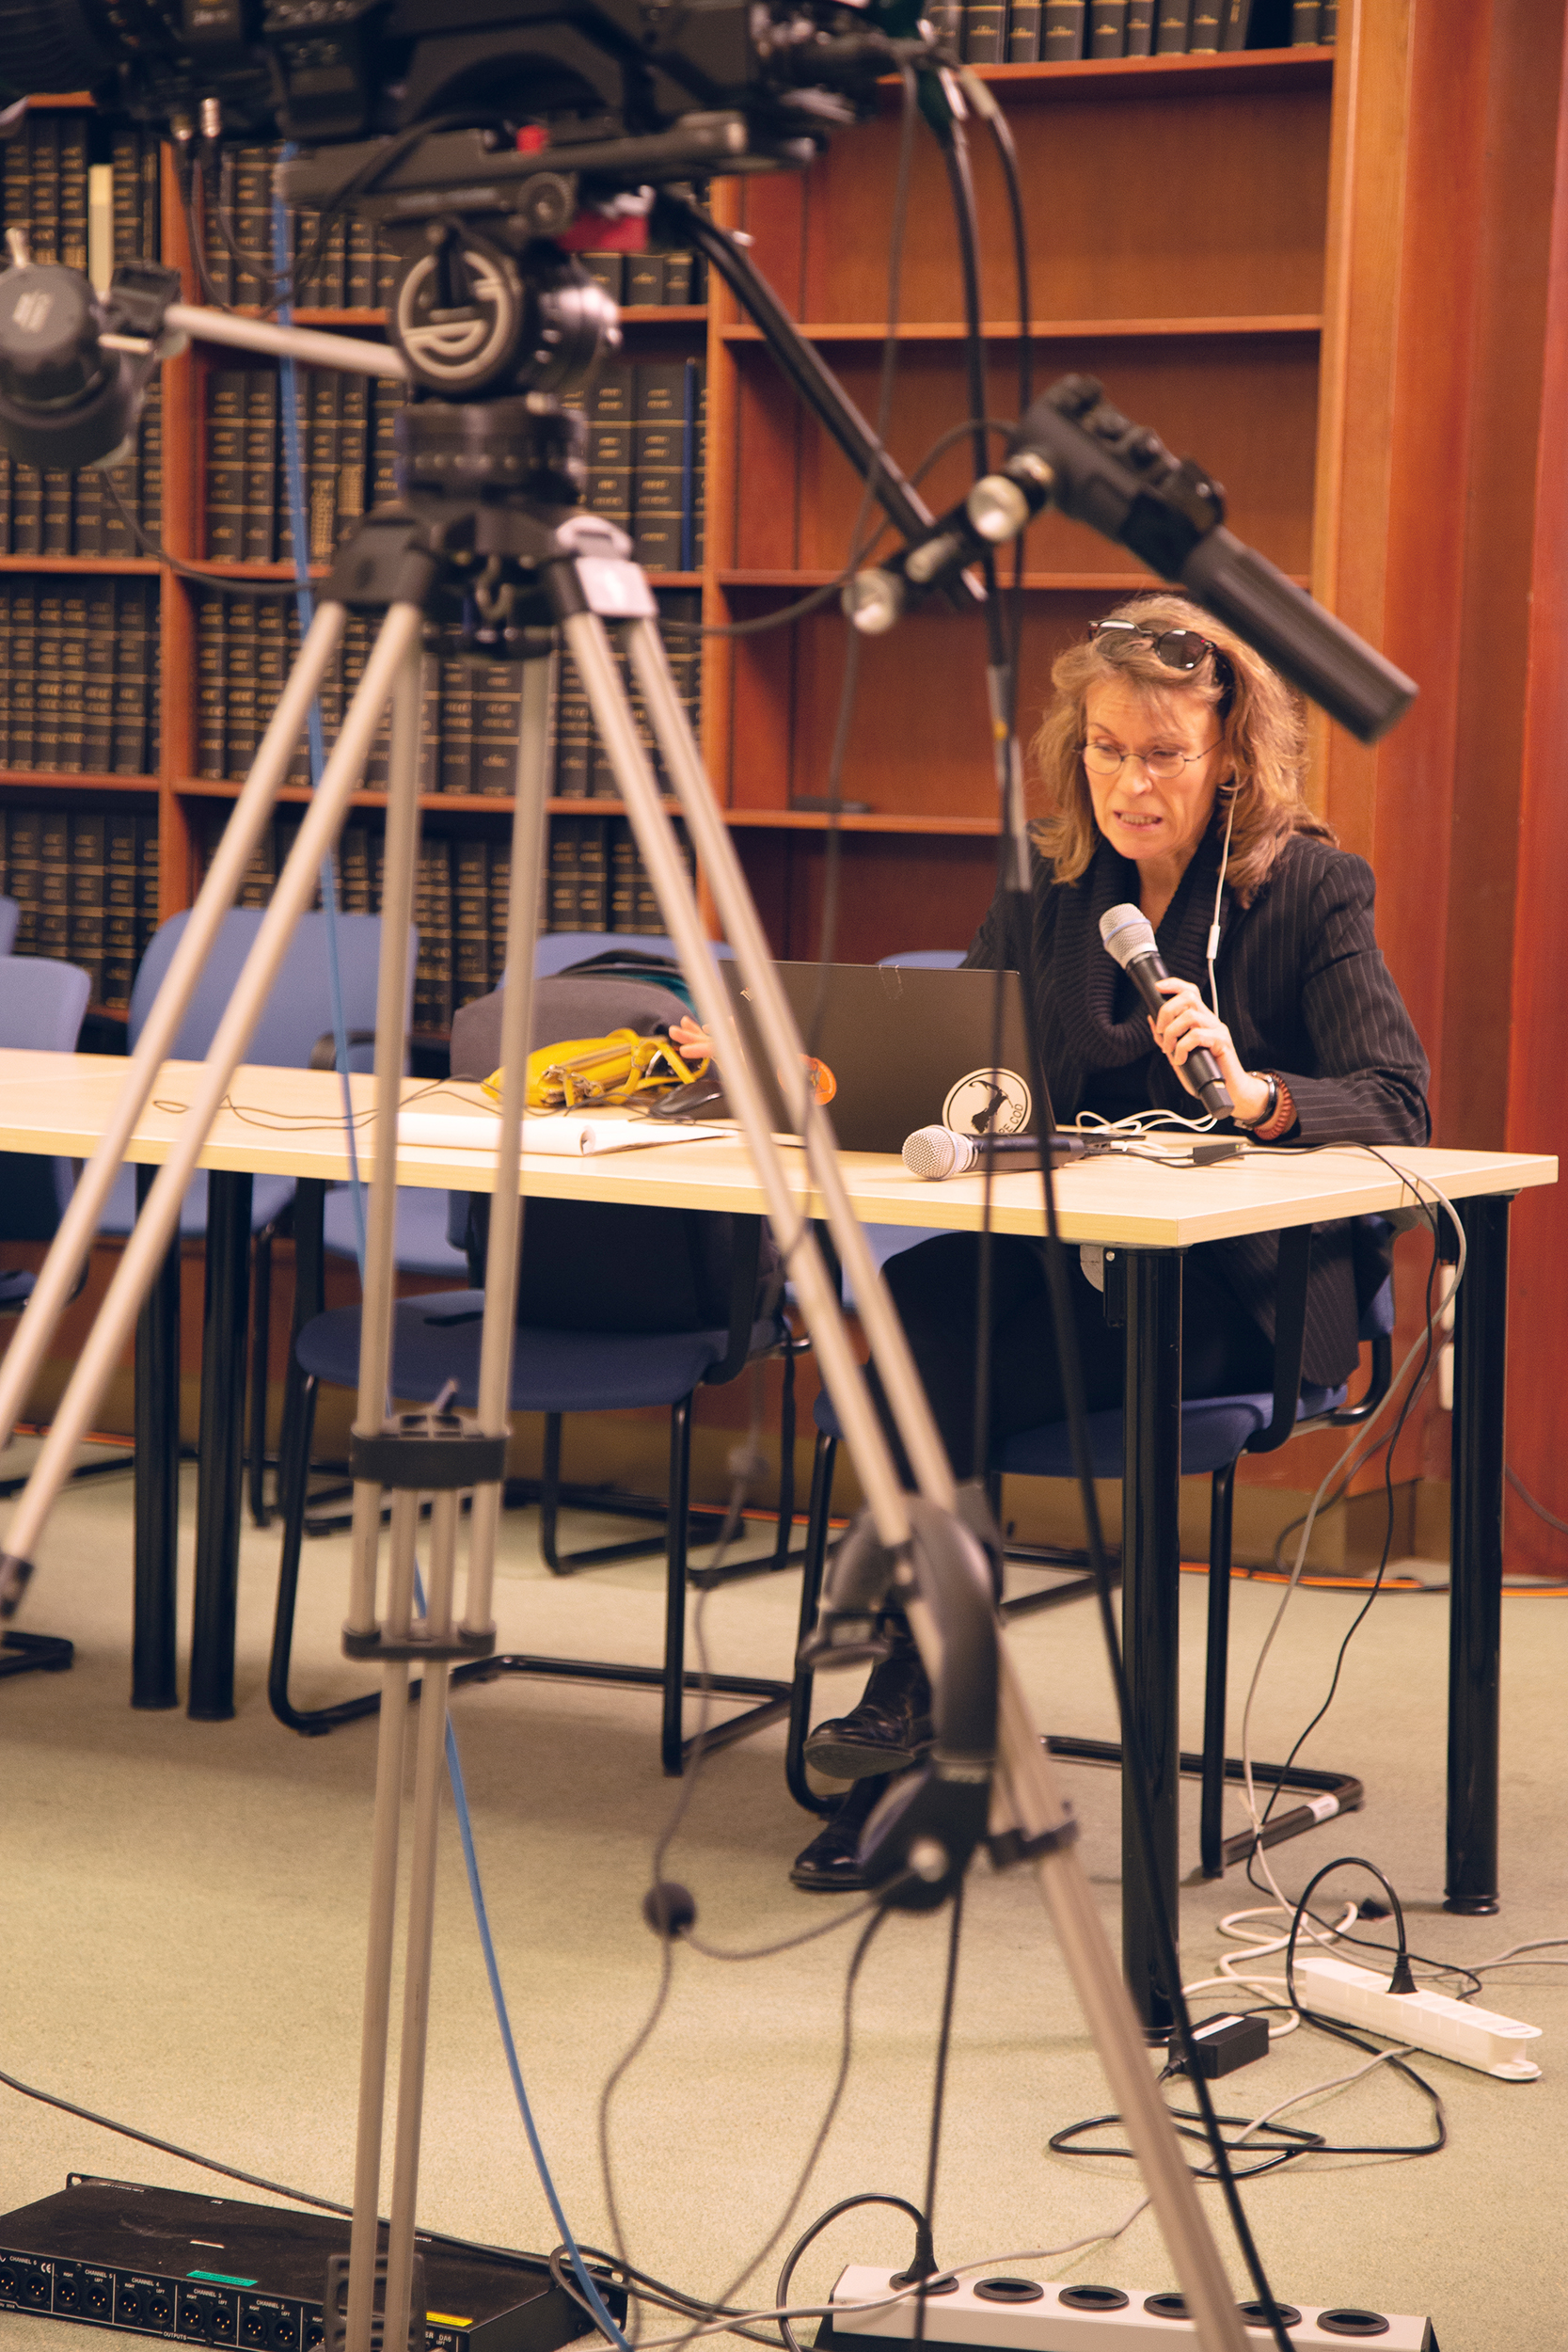 In the foreground of the photo is a tripod, surrounded by cords and other equipment. In the background, a woman is seated at a table and speaking into a handheld microphone. In front of her, on the table, is another microphone. Behind her are chairs and wooden shelves with books. 